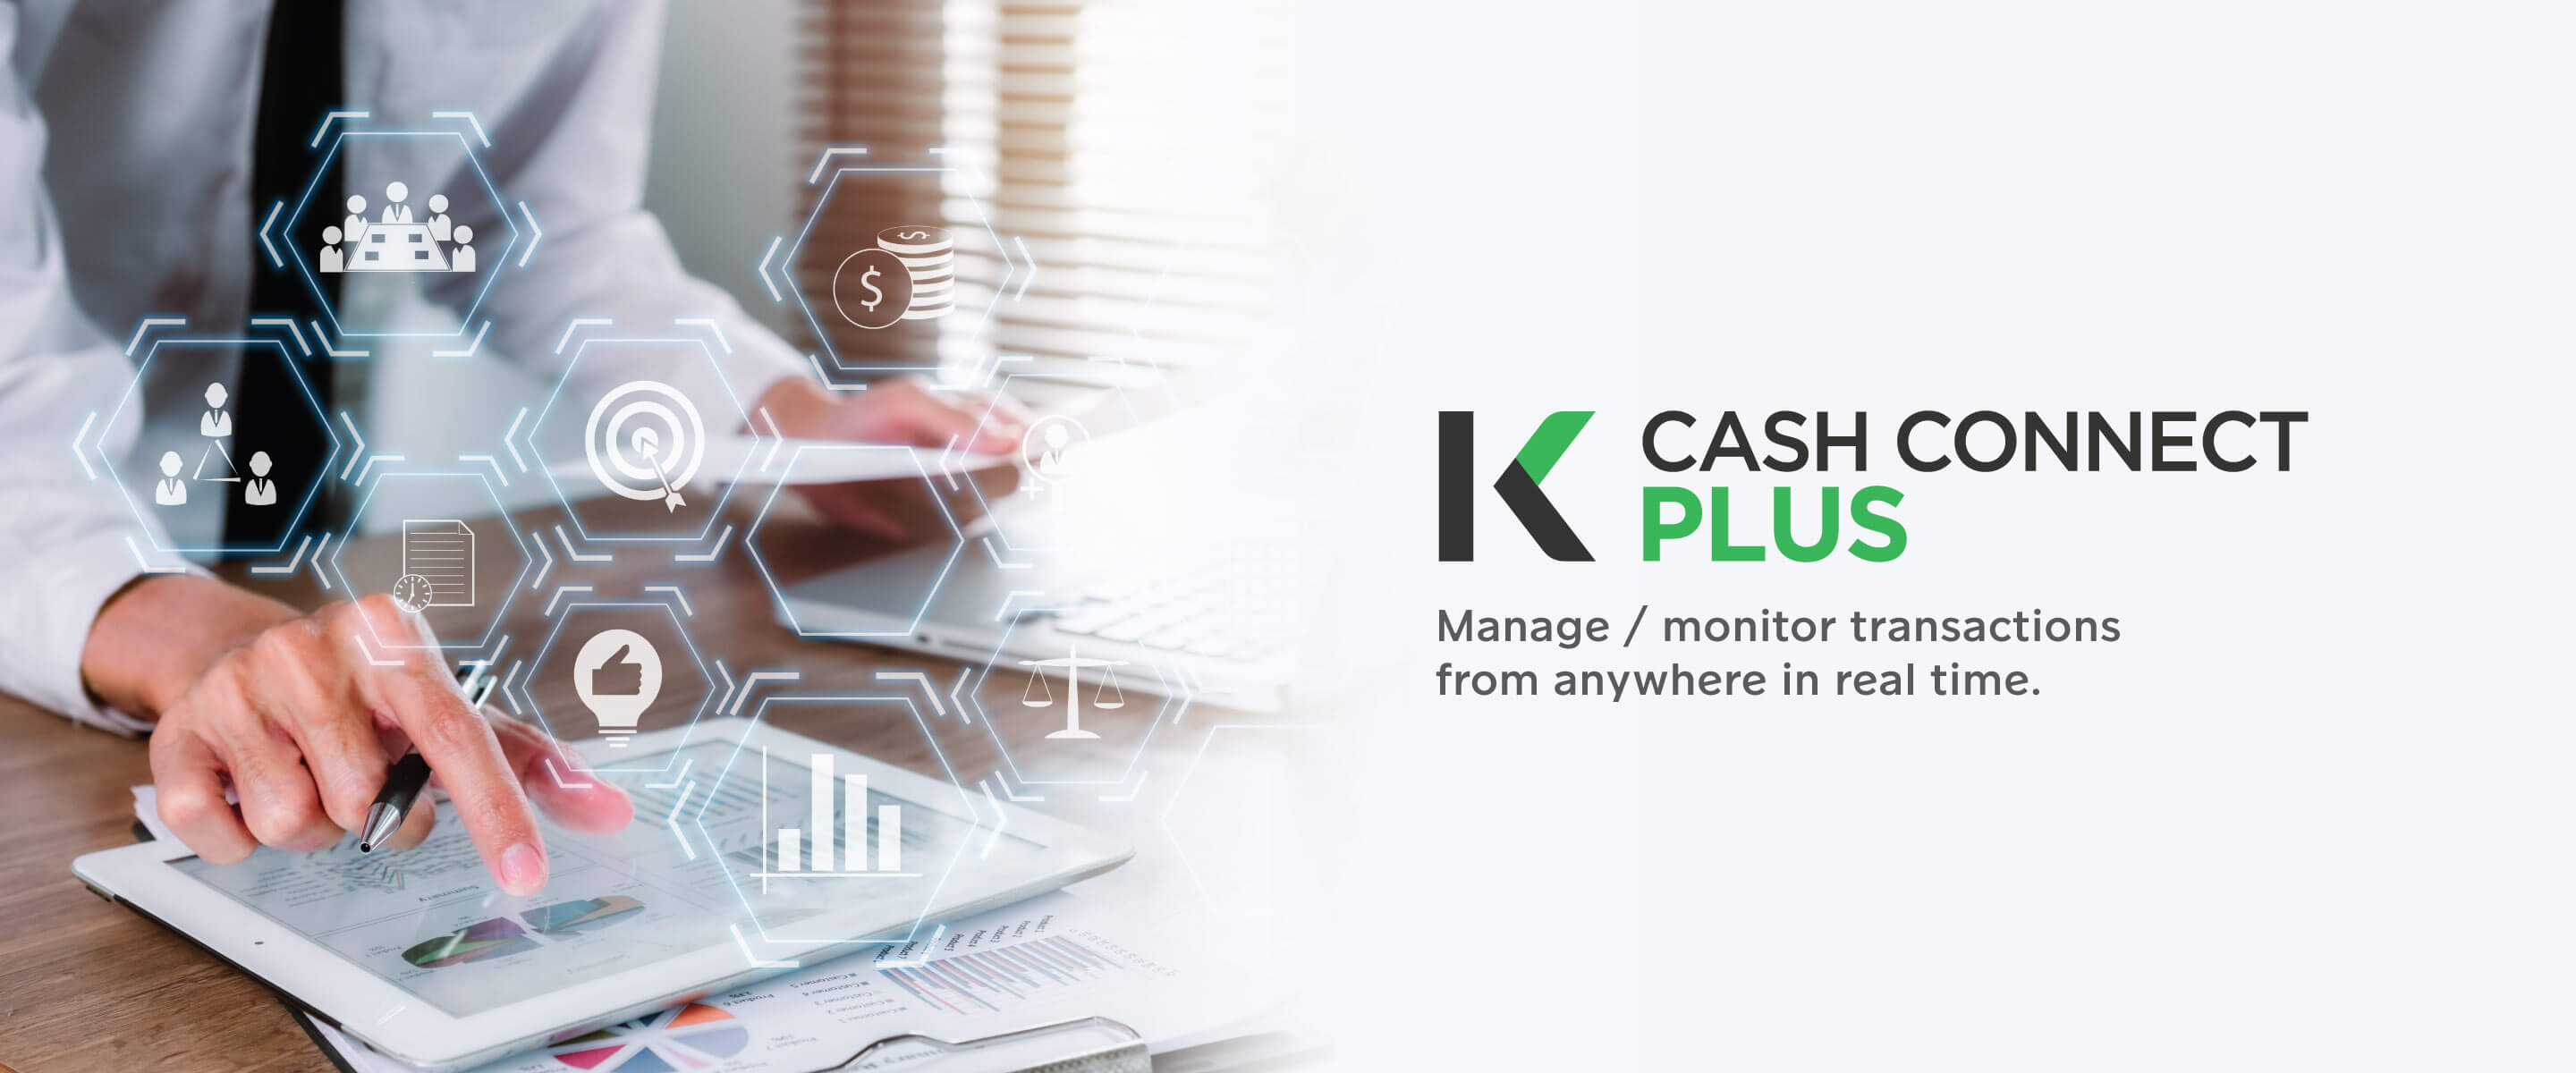 K-Cash Connect Plus is an Online Banking for business, Manage / monitor transactions from anywhere in real time​​​.